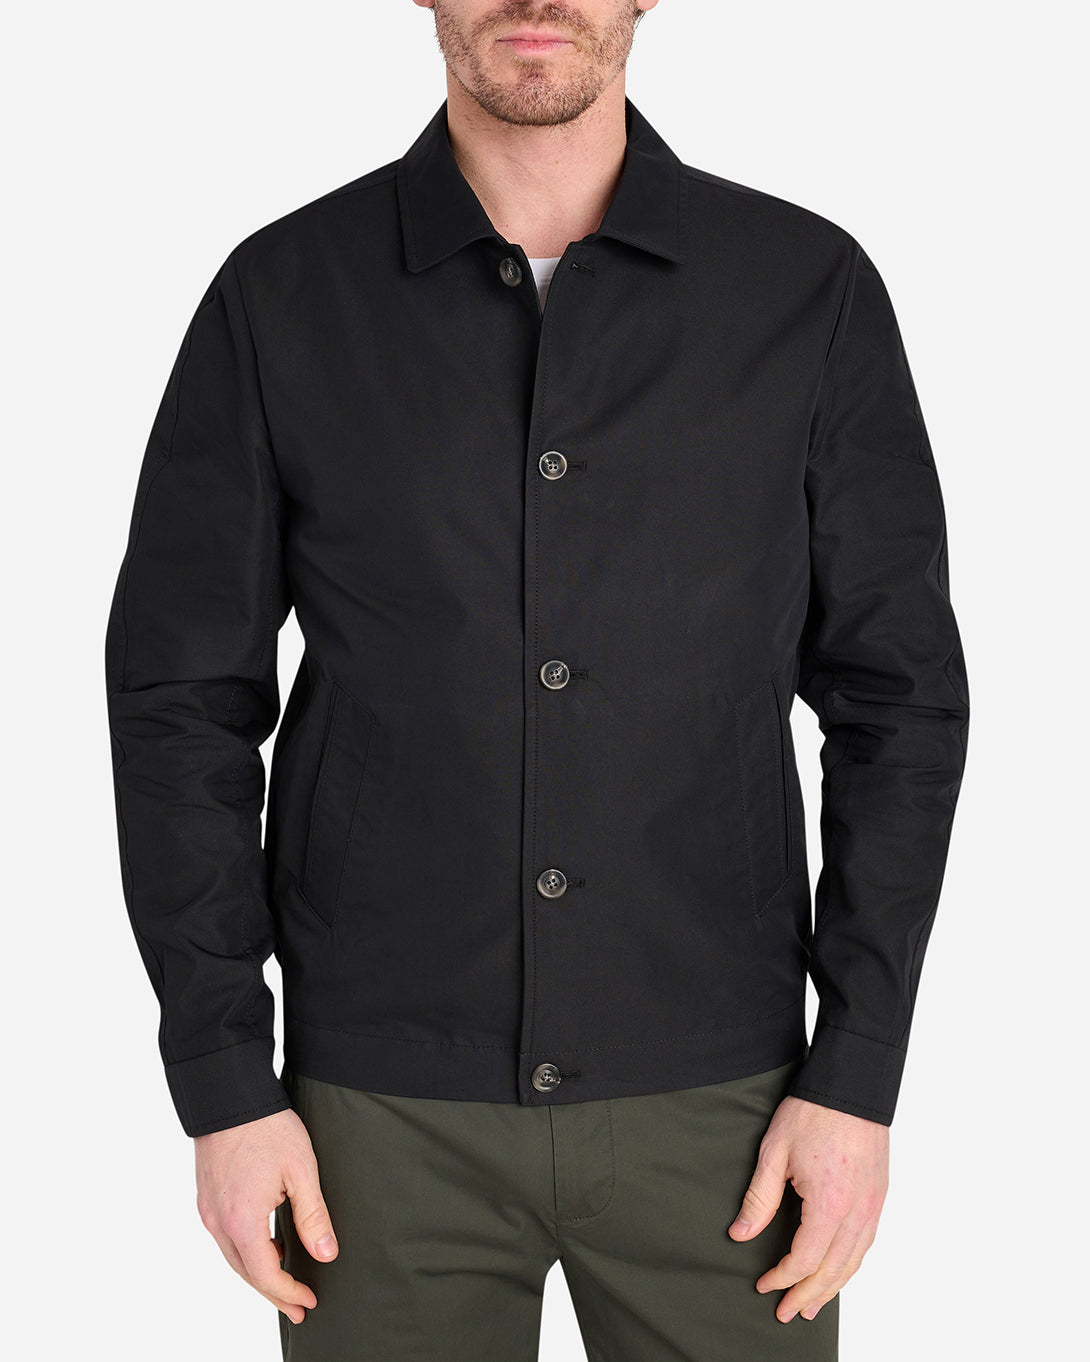 BLACK Hawthorn Twill Jacket Mens Lightweight Layering Outerwear Button Up Collared Jacket